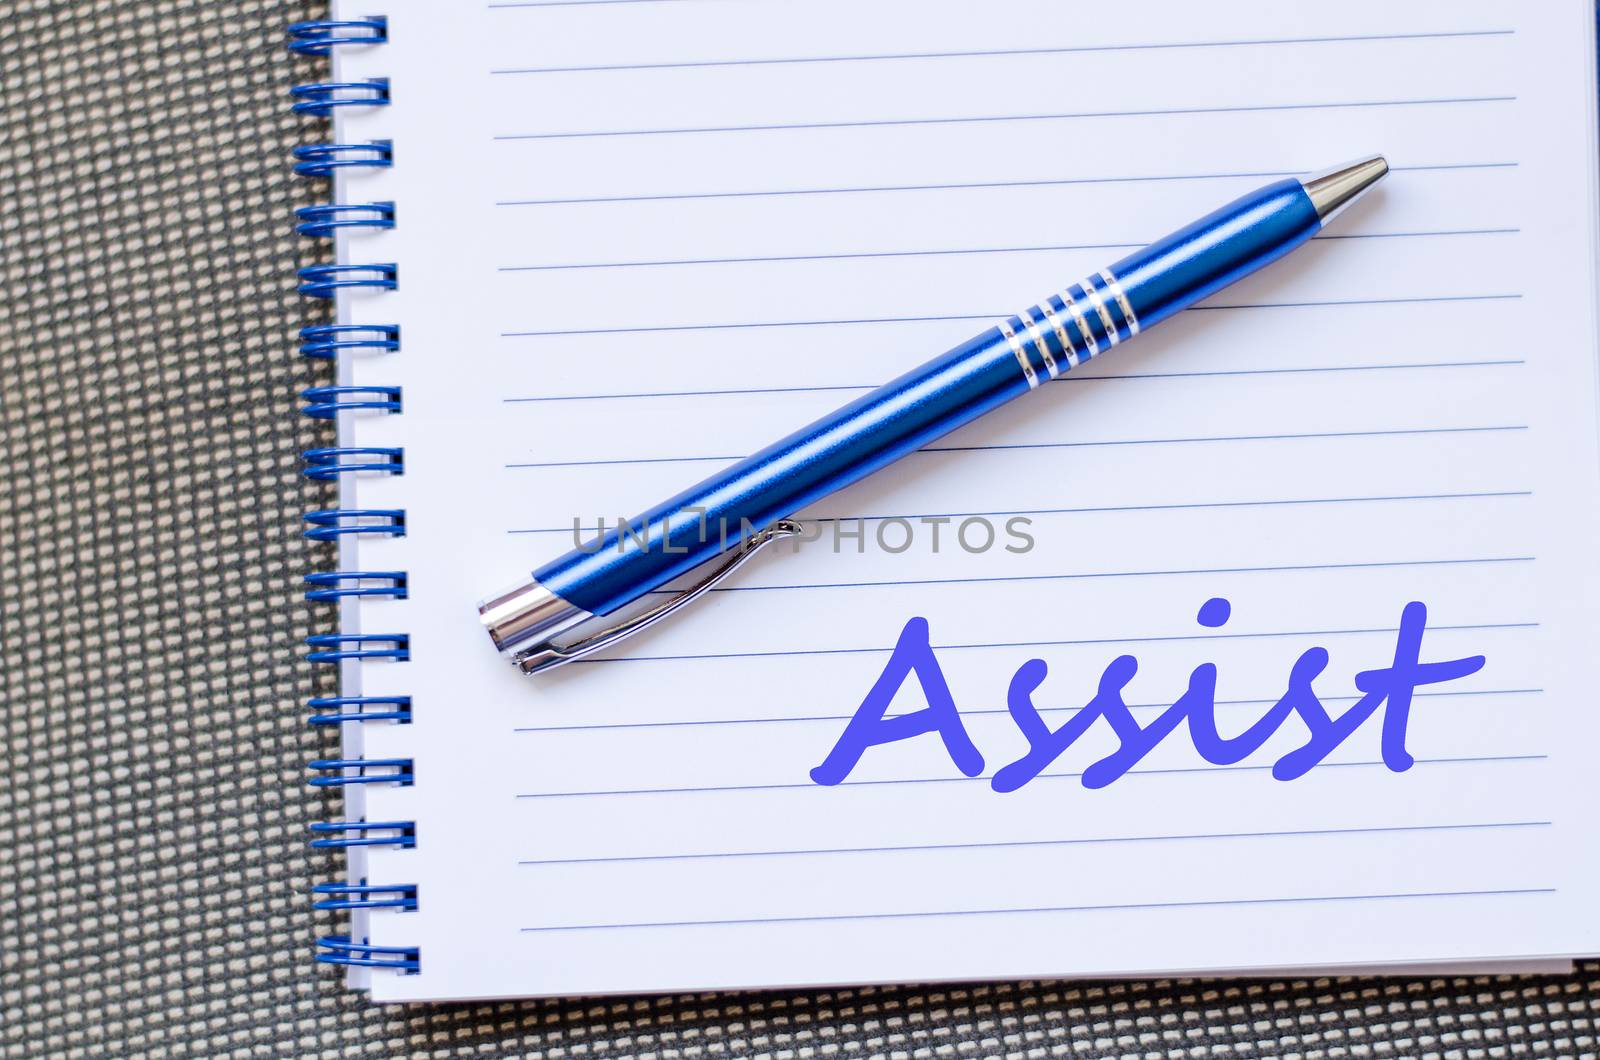 Assist write on notebook by eenevski